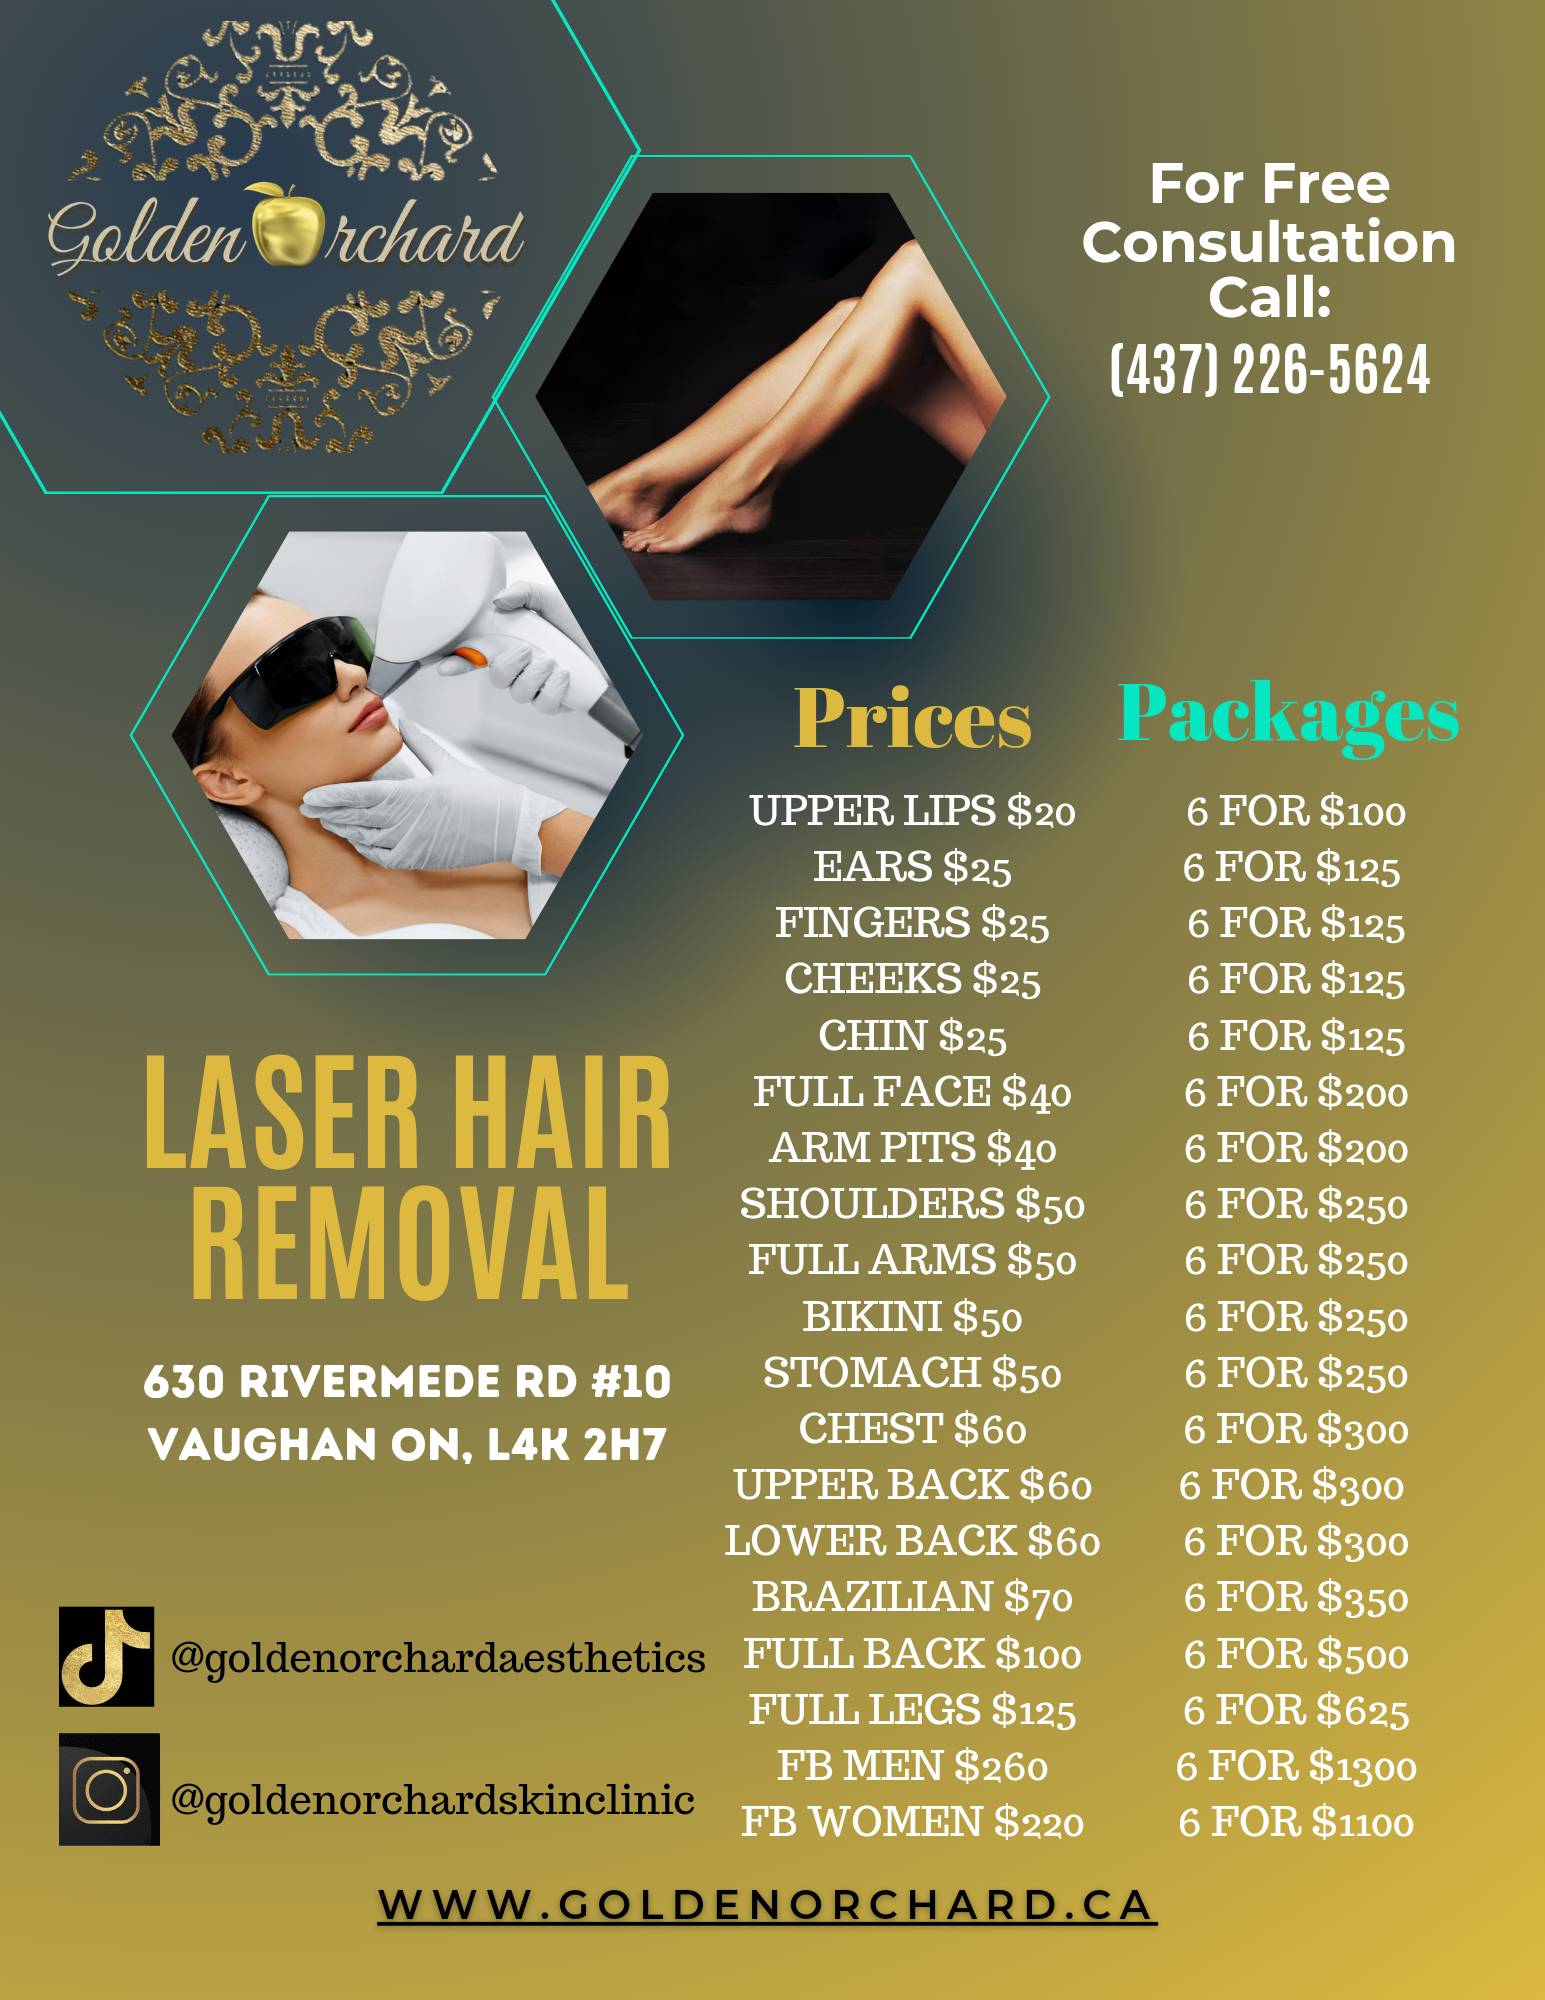 Golden Orchard Skin Clinic